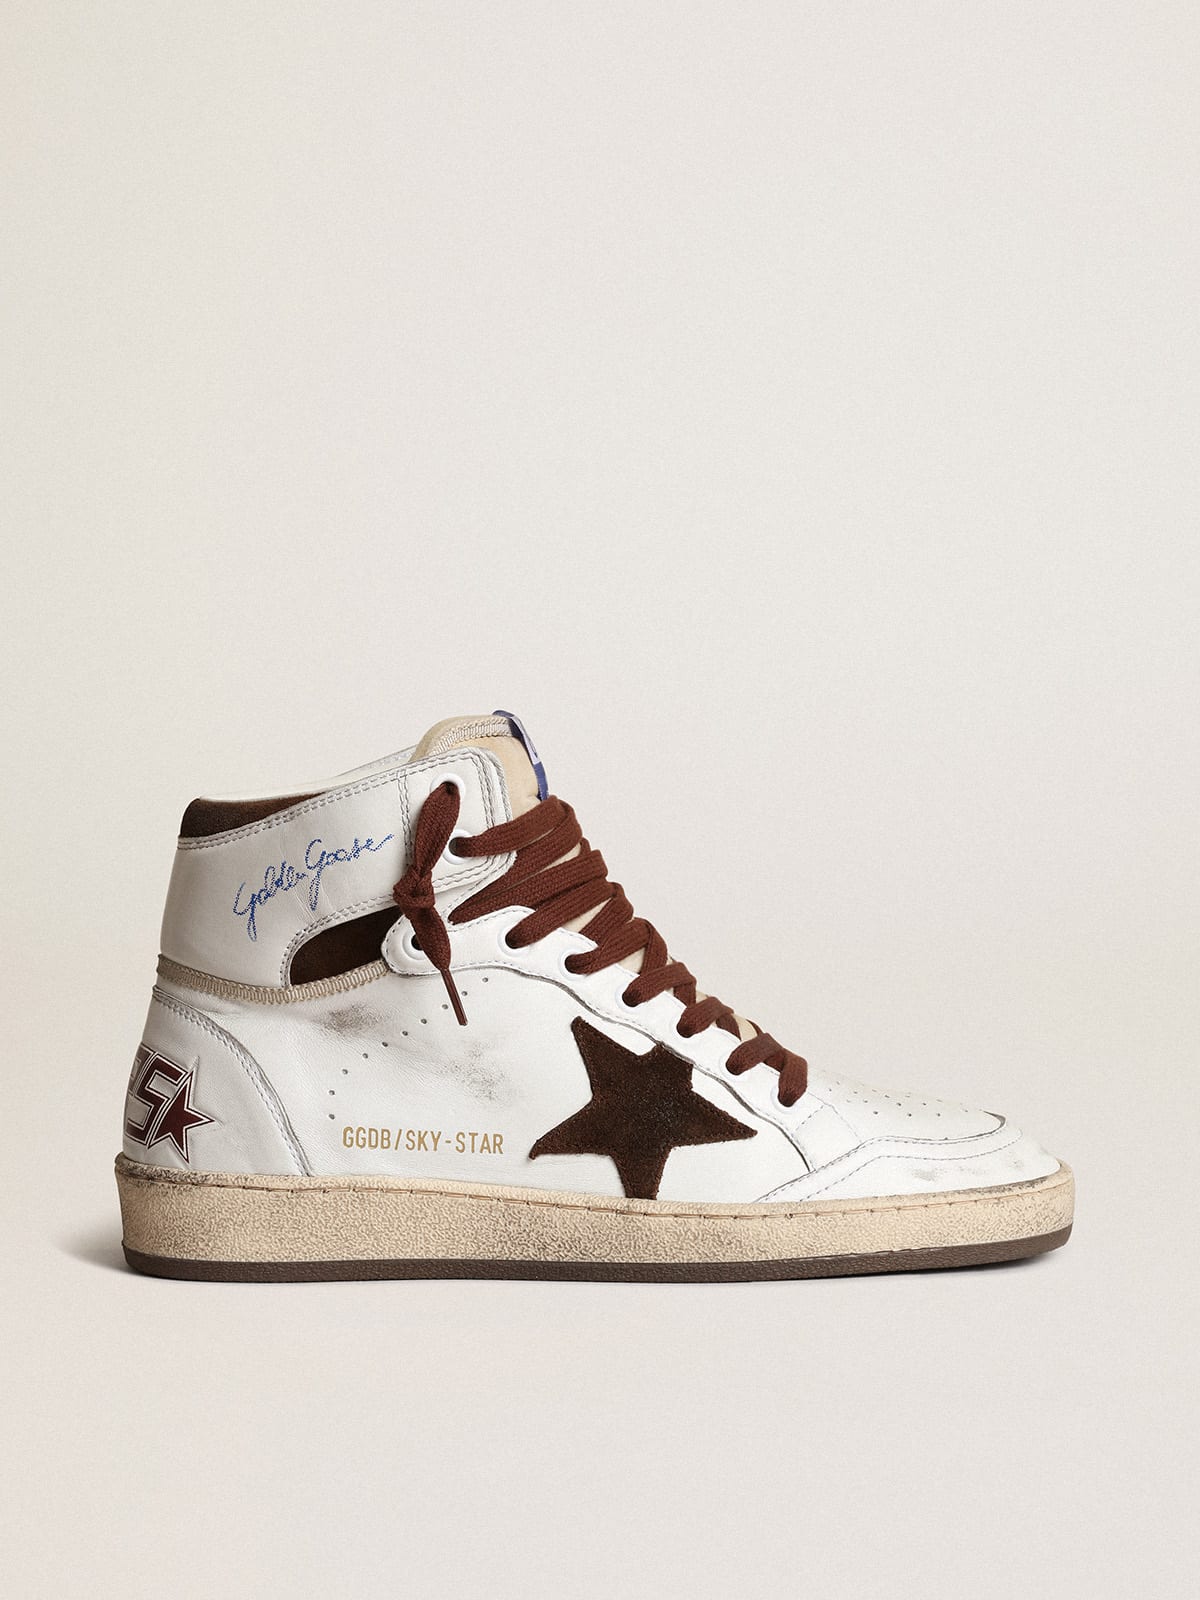 Women's Sky-Star in white nappa leather with chocolate suede star